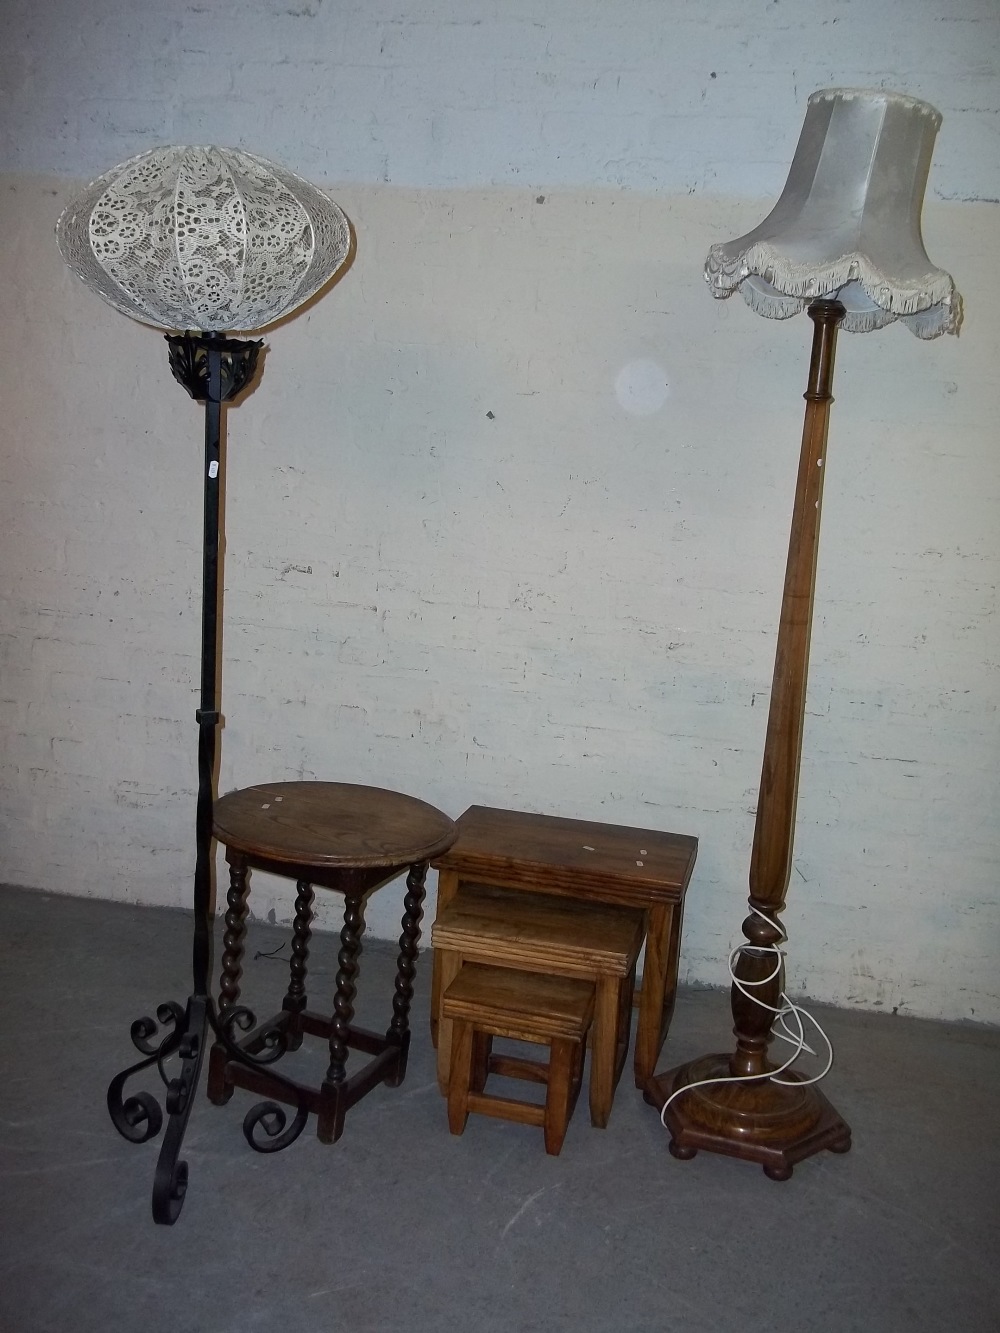 A NEST OF THREE TABLES, AN ANTIQUE BARLEY TWIST OAK SIDE TABLE AND TWO FLOOR STANDING STANDARD LAMPS